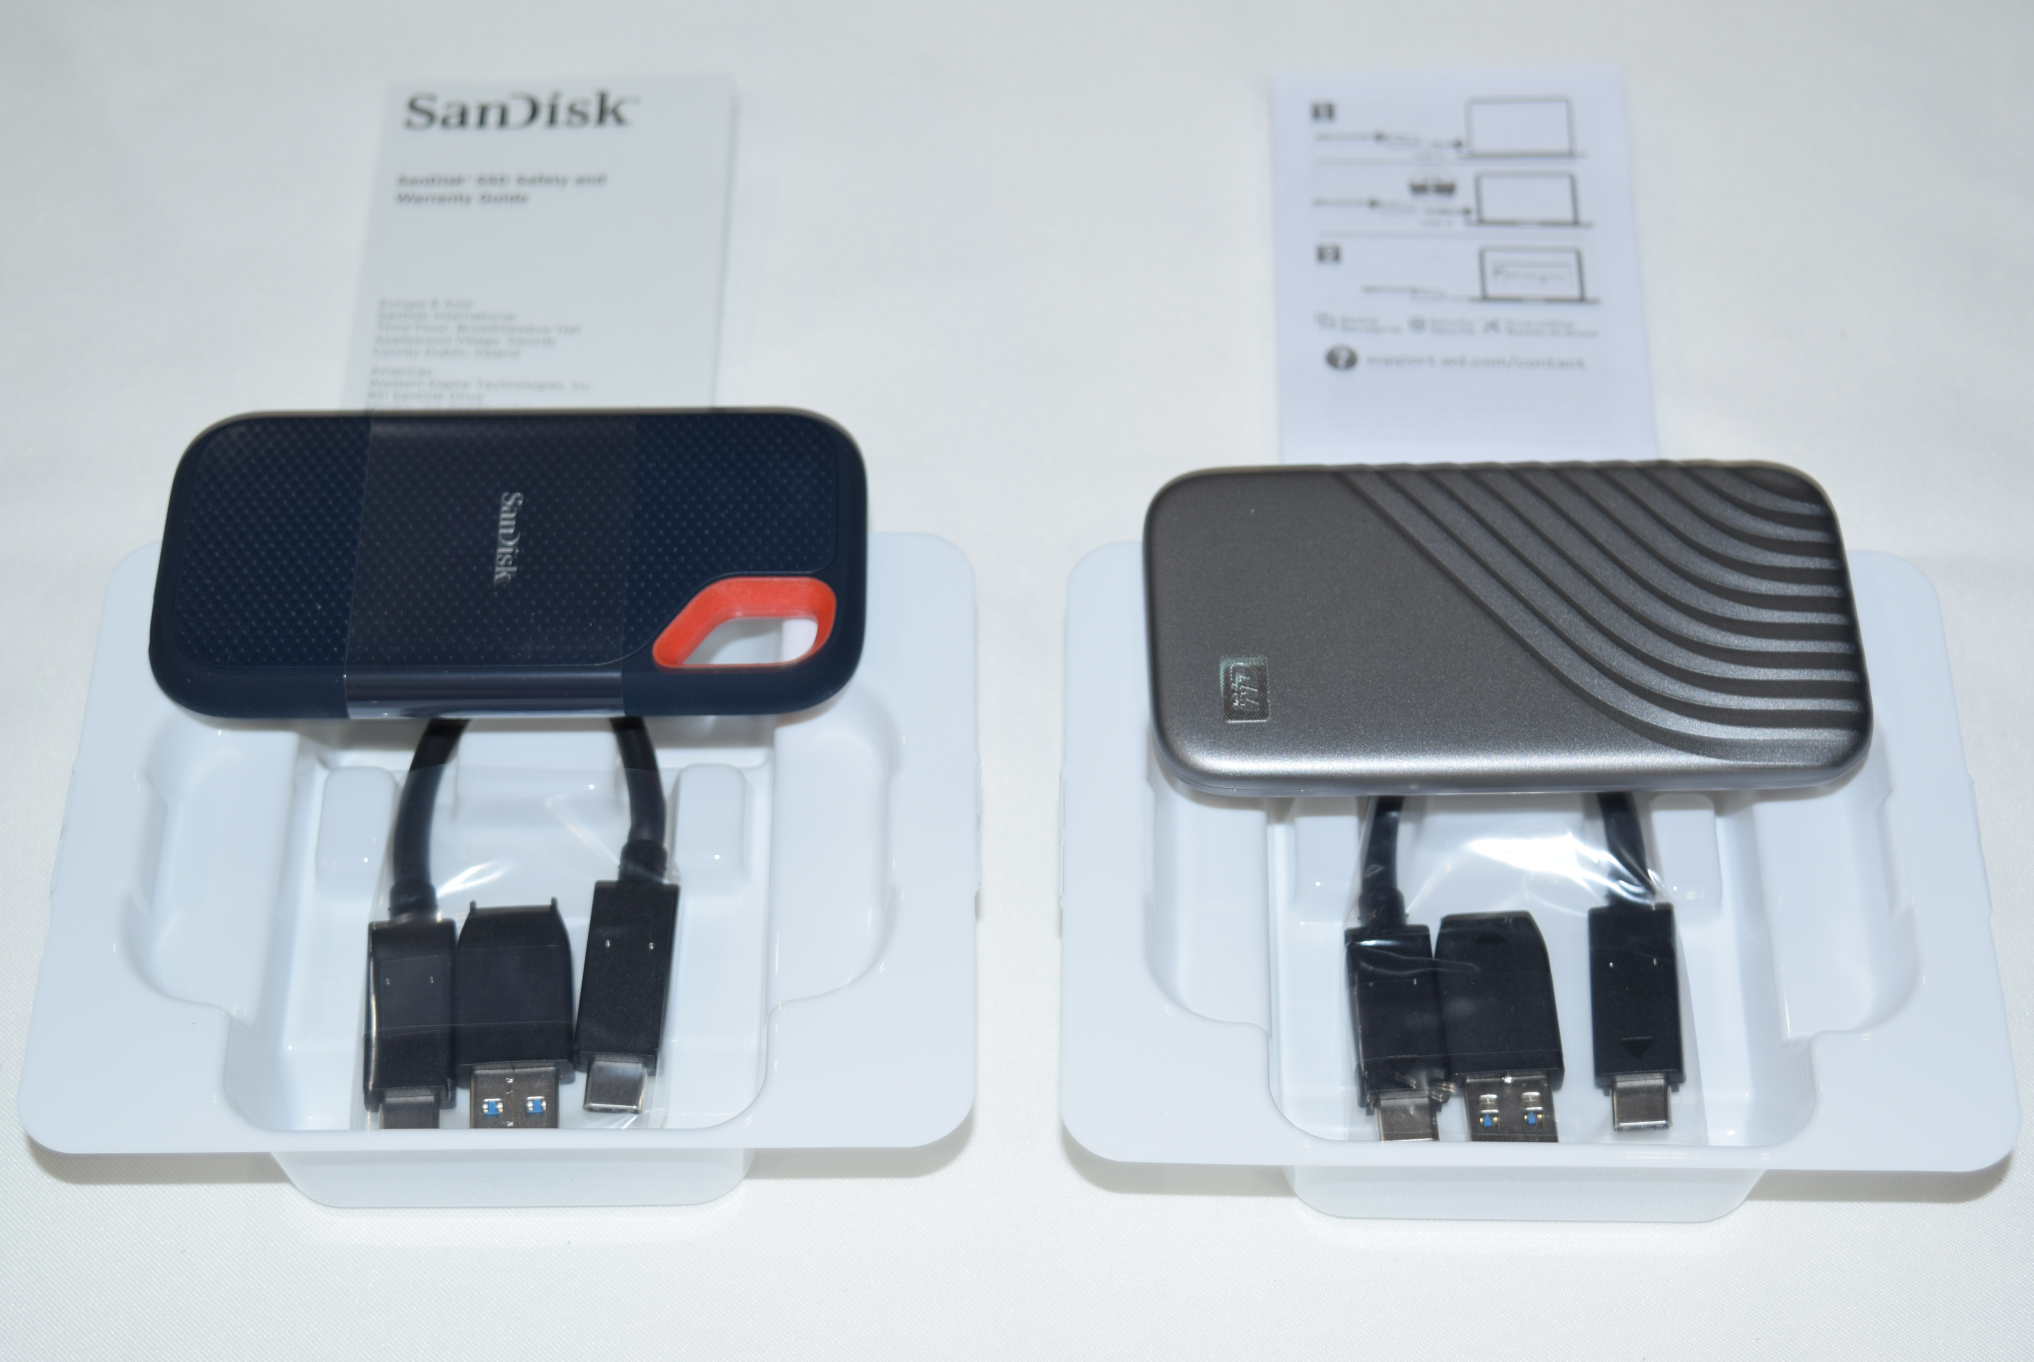 Funny Opera cup SanDisk Extreme Portable SSD v2 and WD My Passport SSD (2020) Review